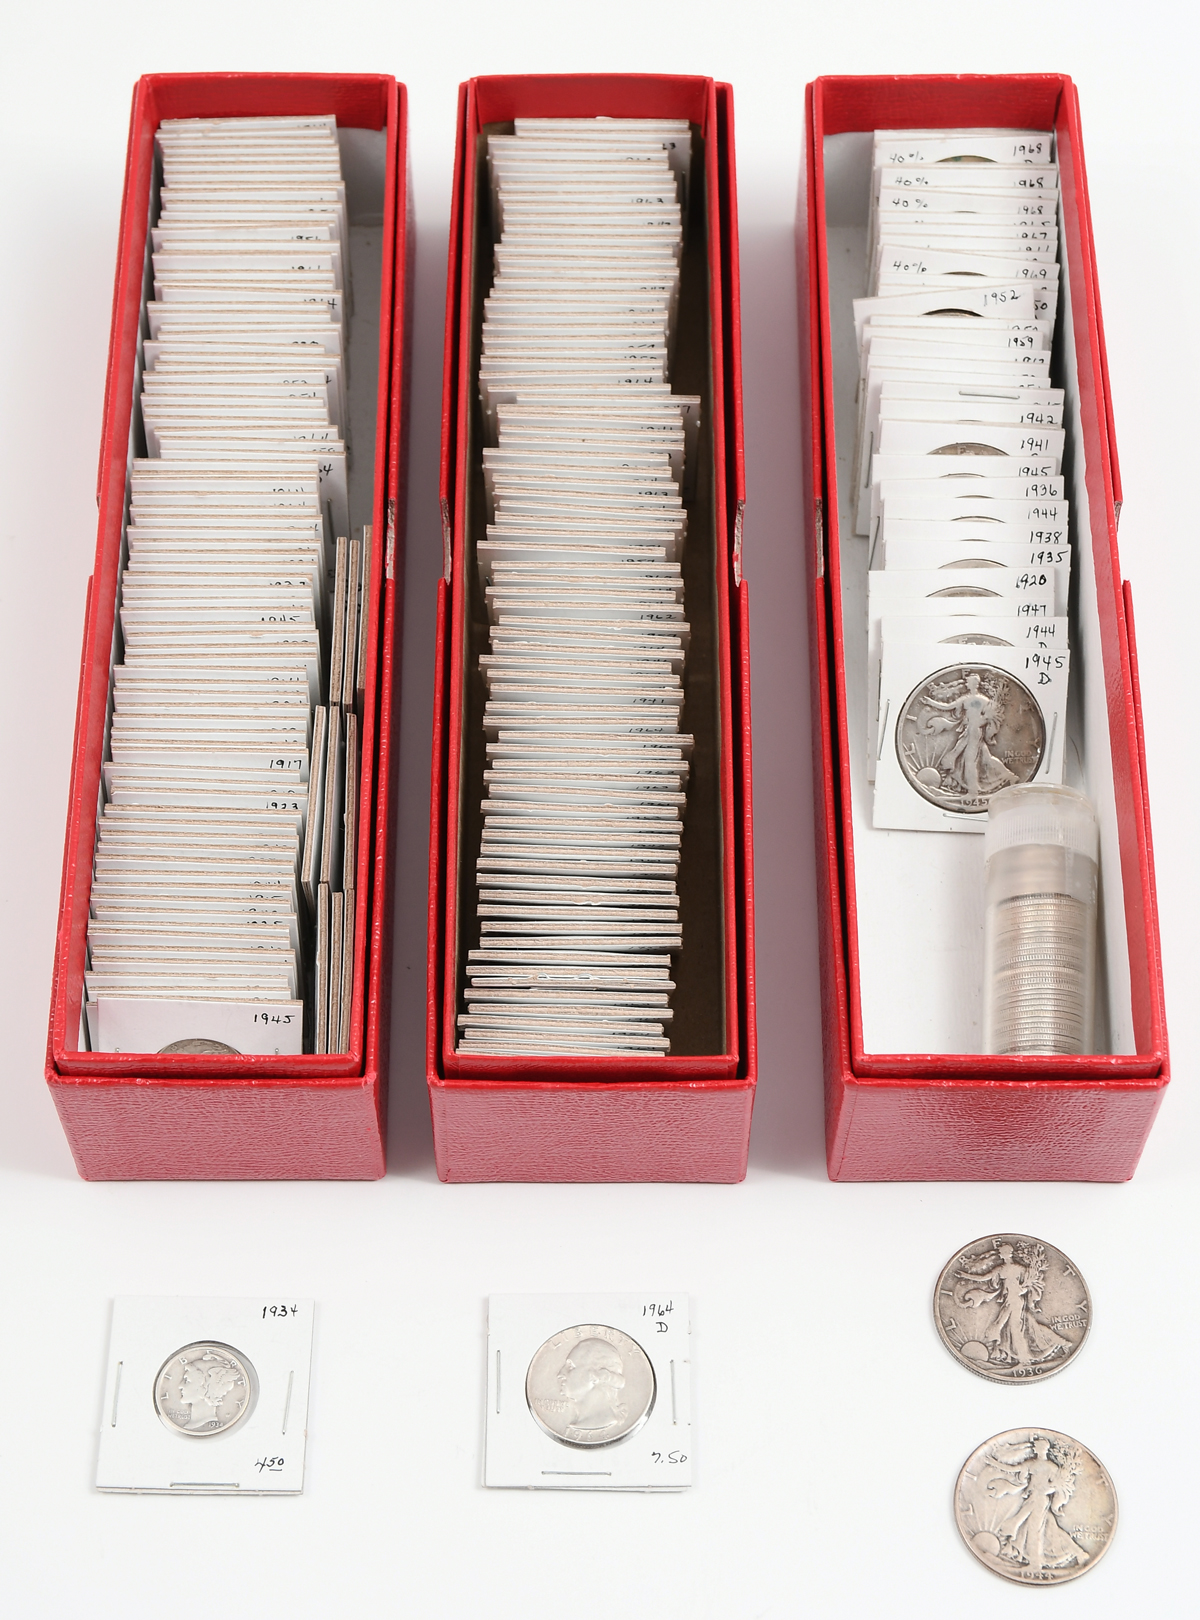 250 U S MINT SILVER COIN COLLECTION  2ecaf0